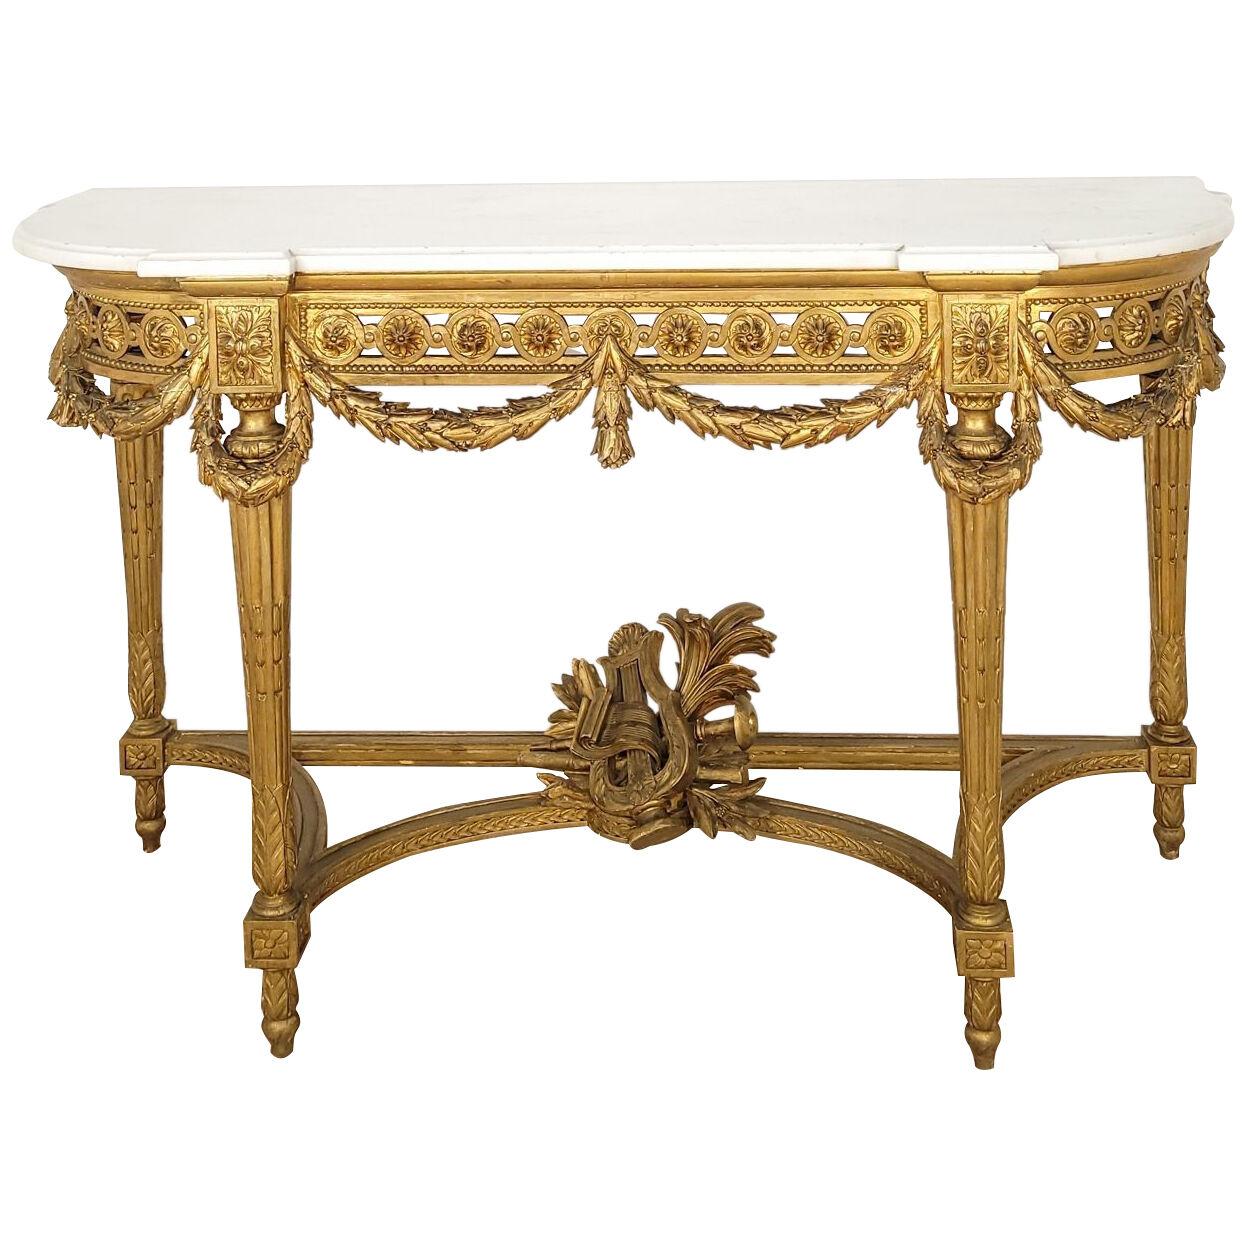 Vintage Console, Louis XVI Style, Giltwood and White Marble, circa 1900